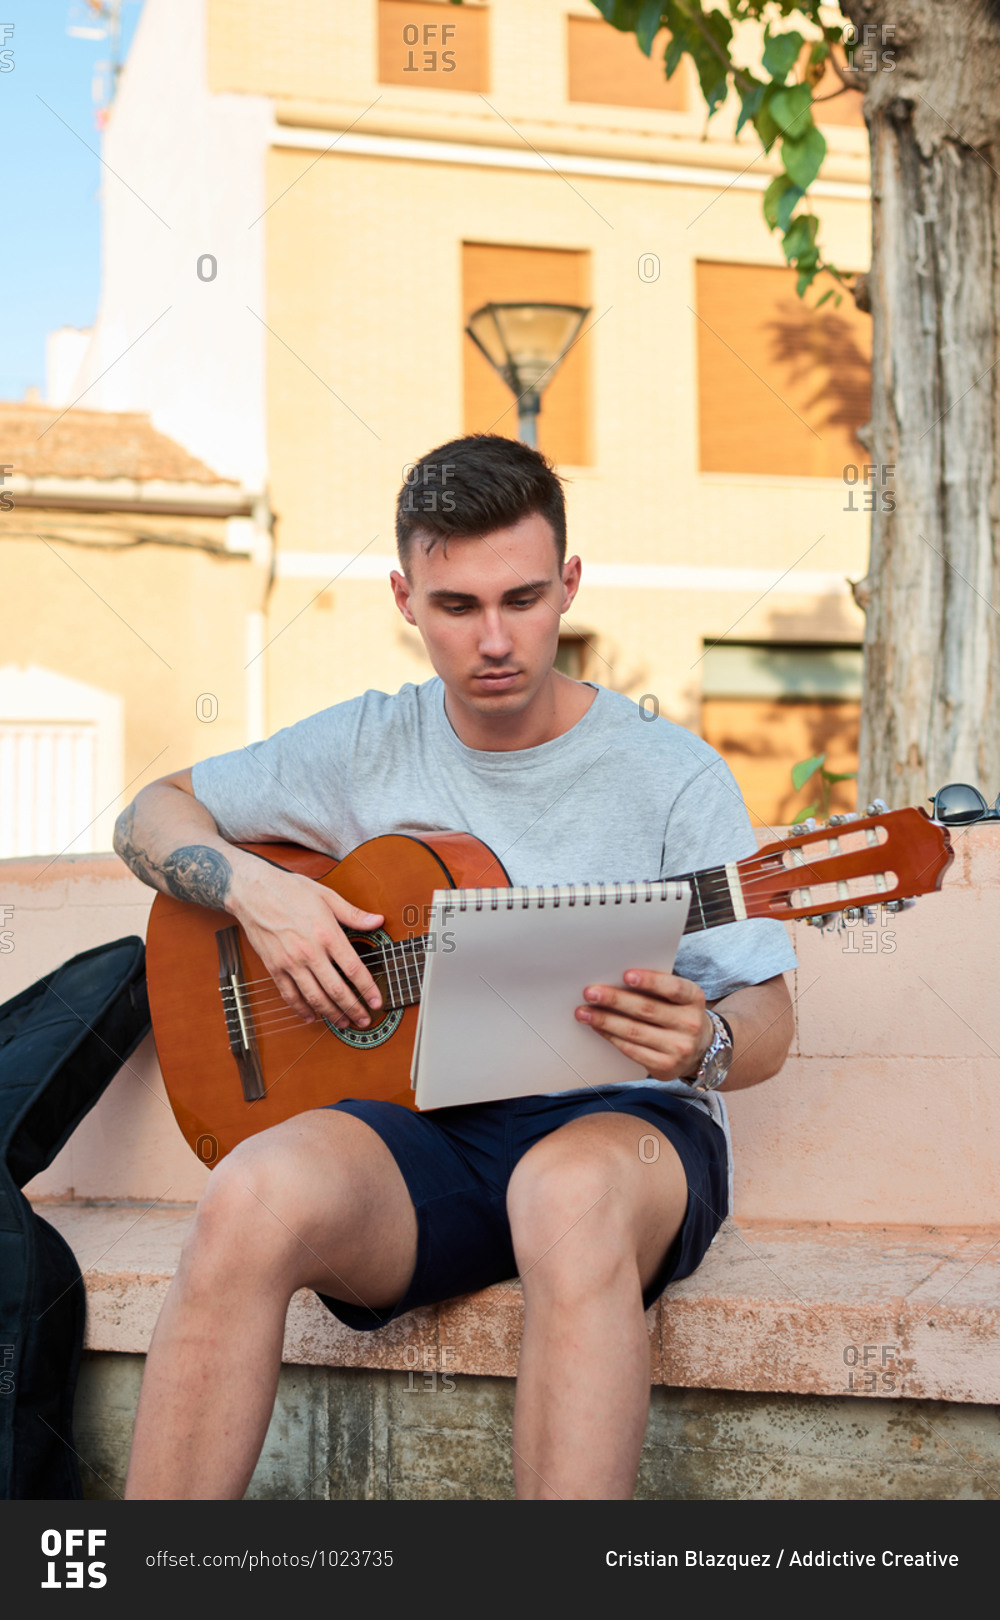 Creative male musician sitting on stone bench on street and reading notes while preparing for playing guitar